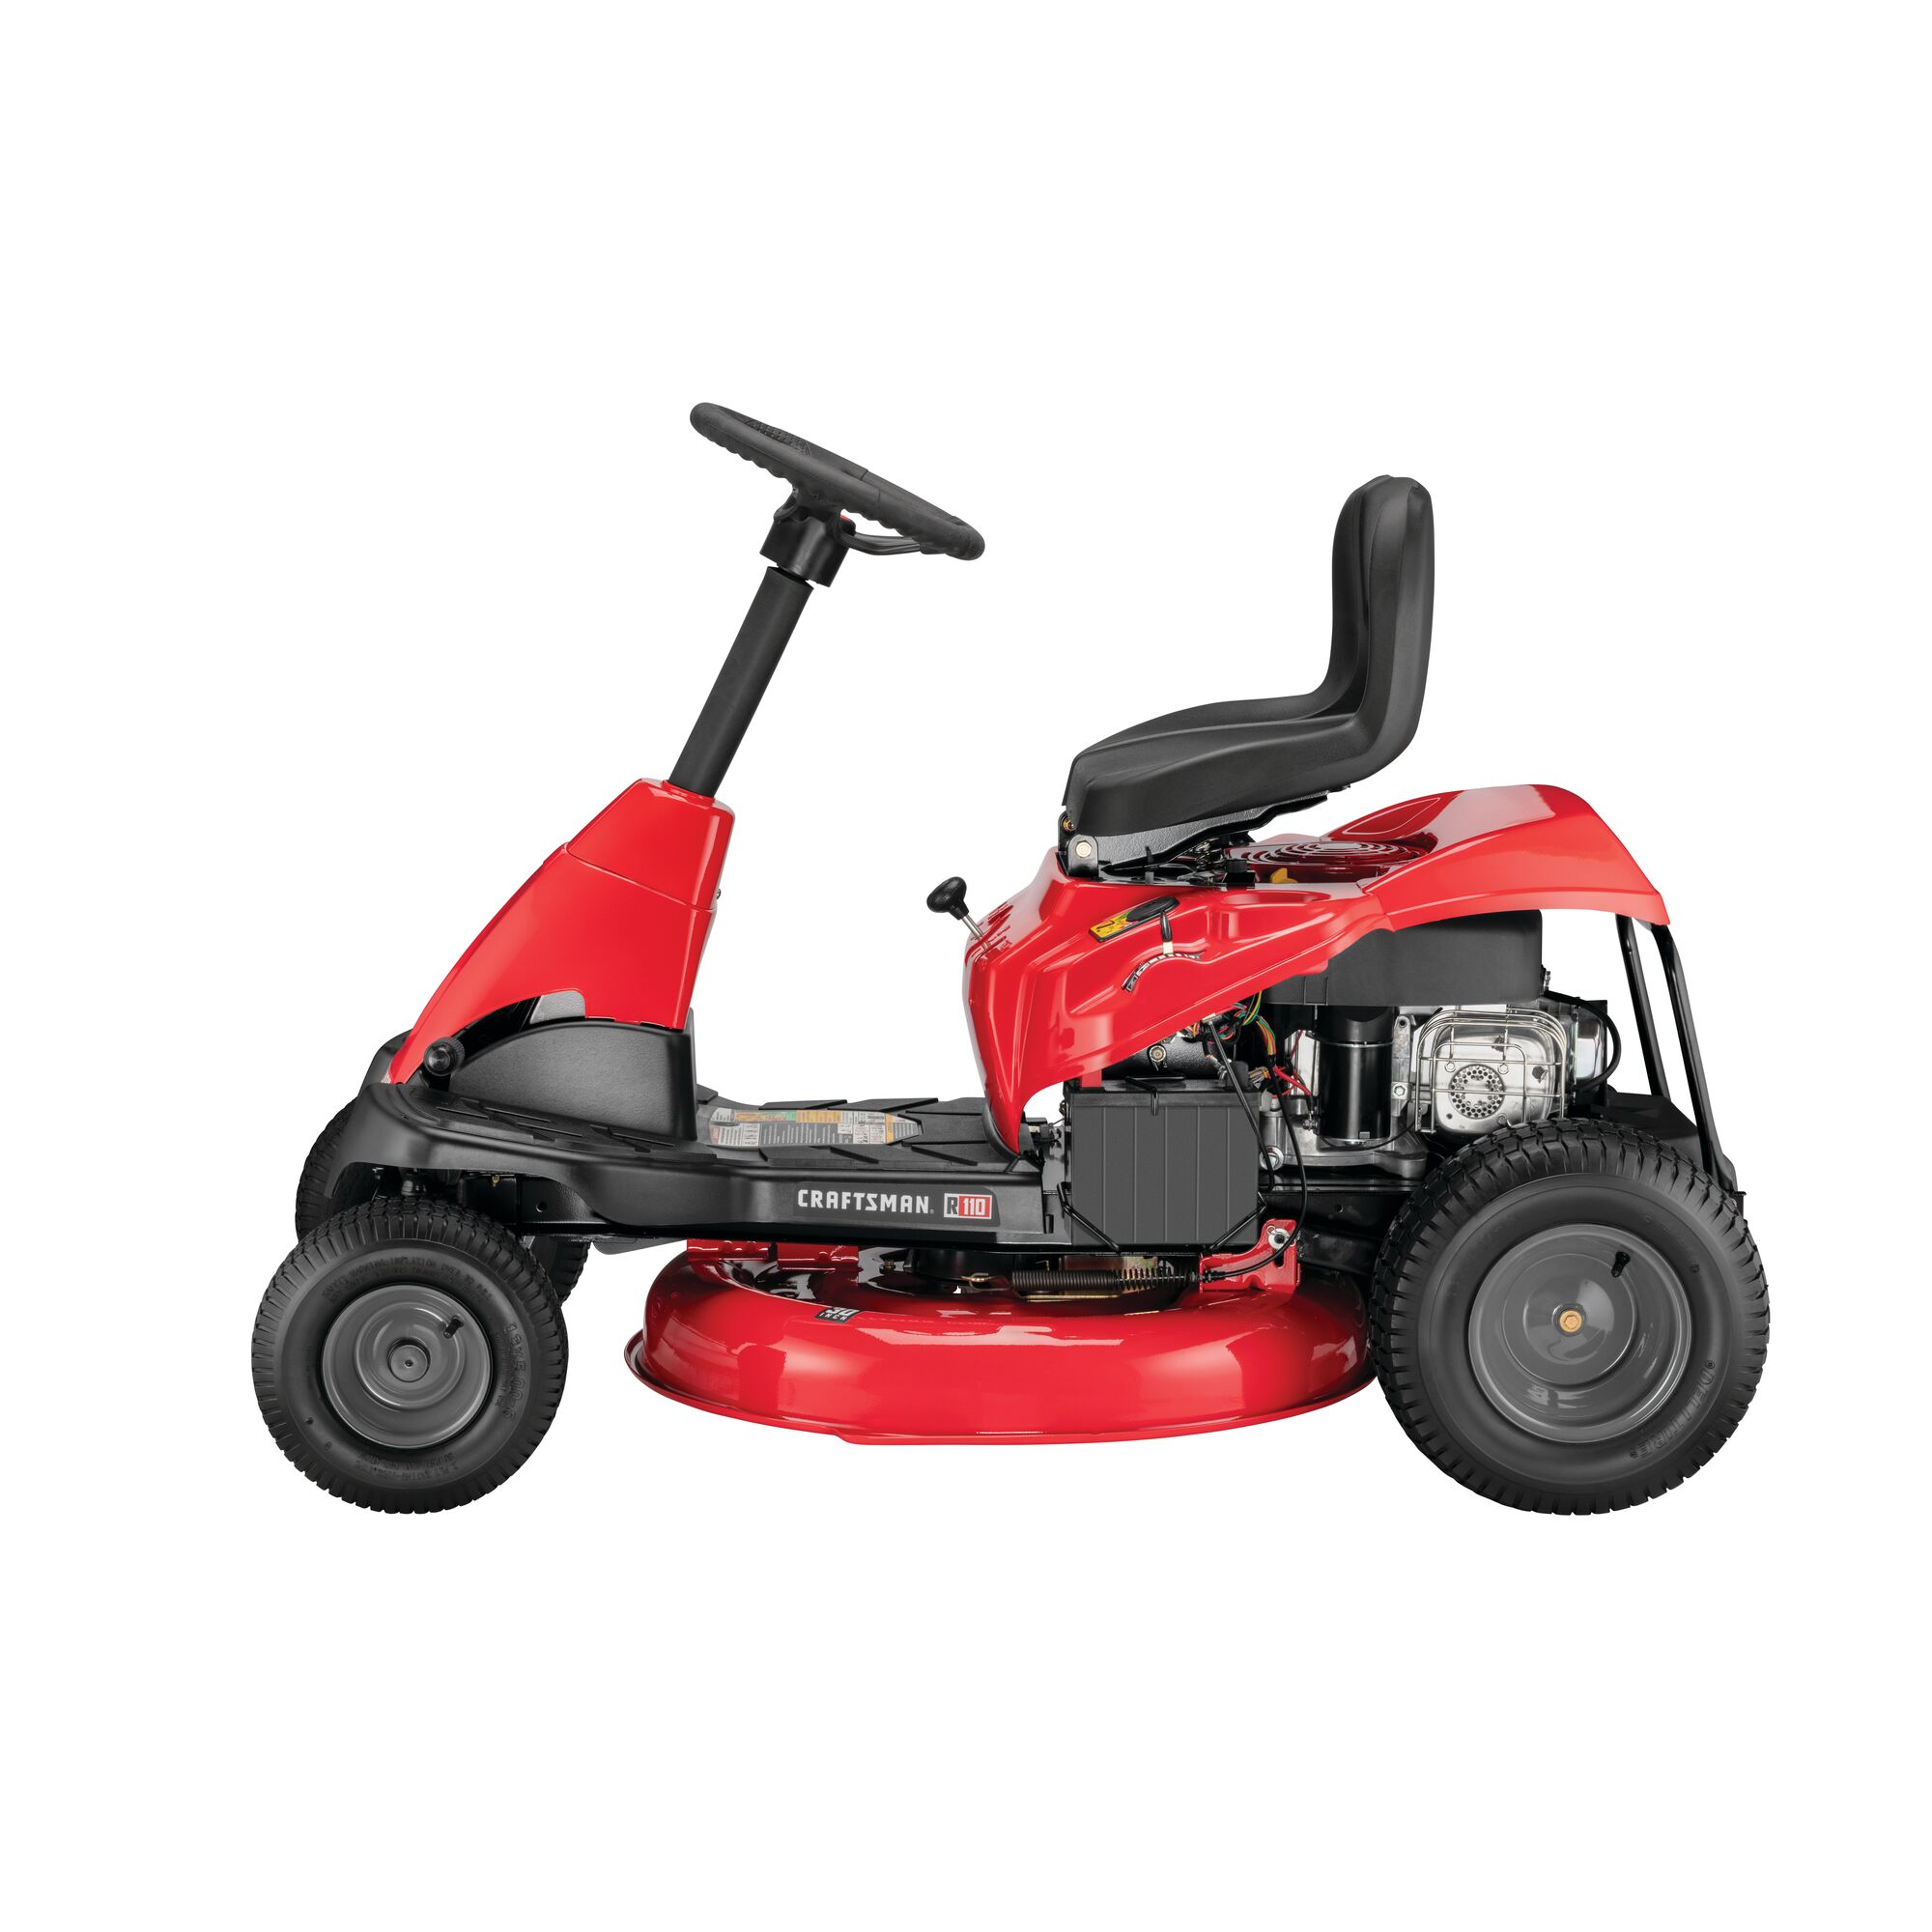 Profile of 30 inch 10 h p gear drive mini riding mower with mulching kit.